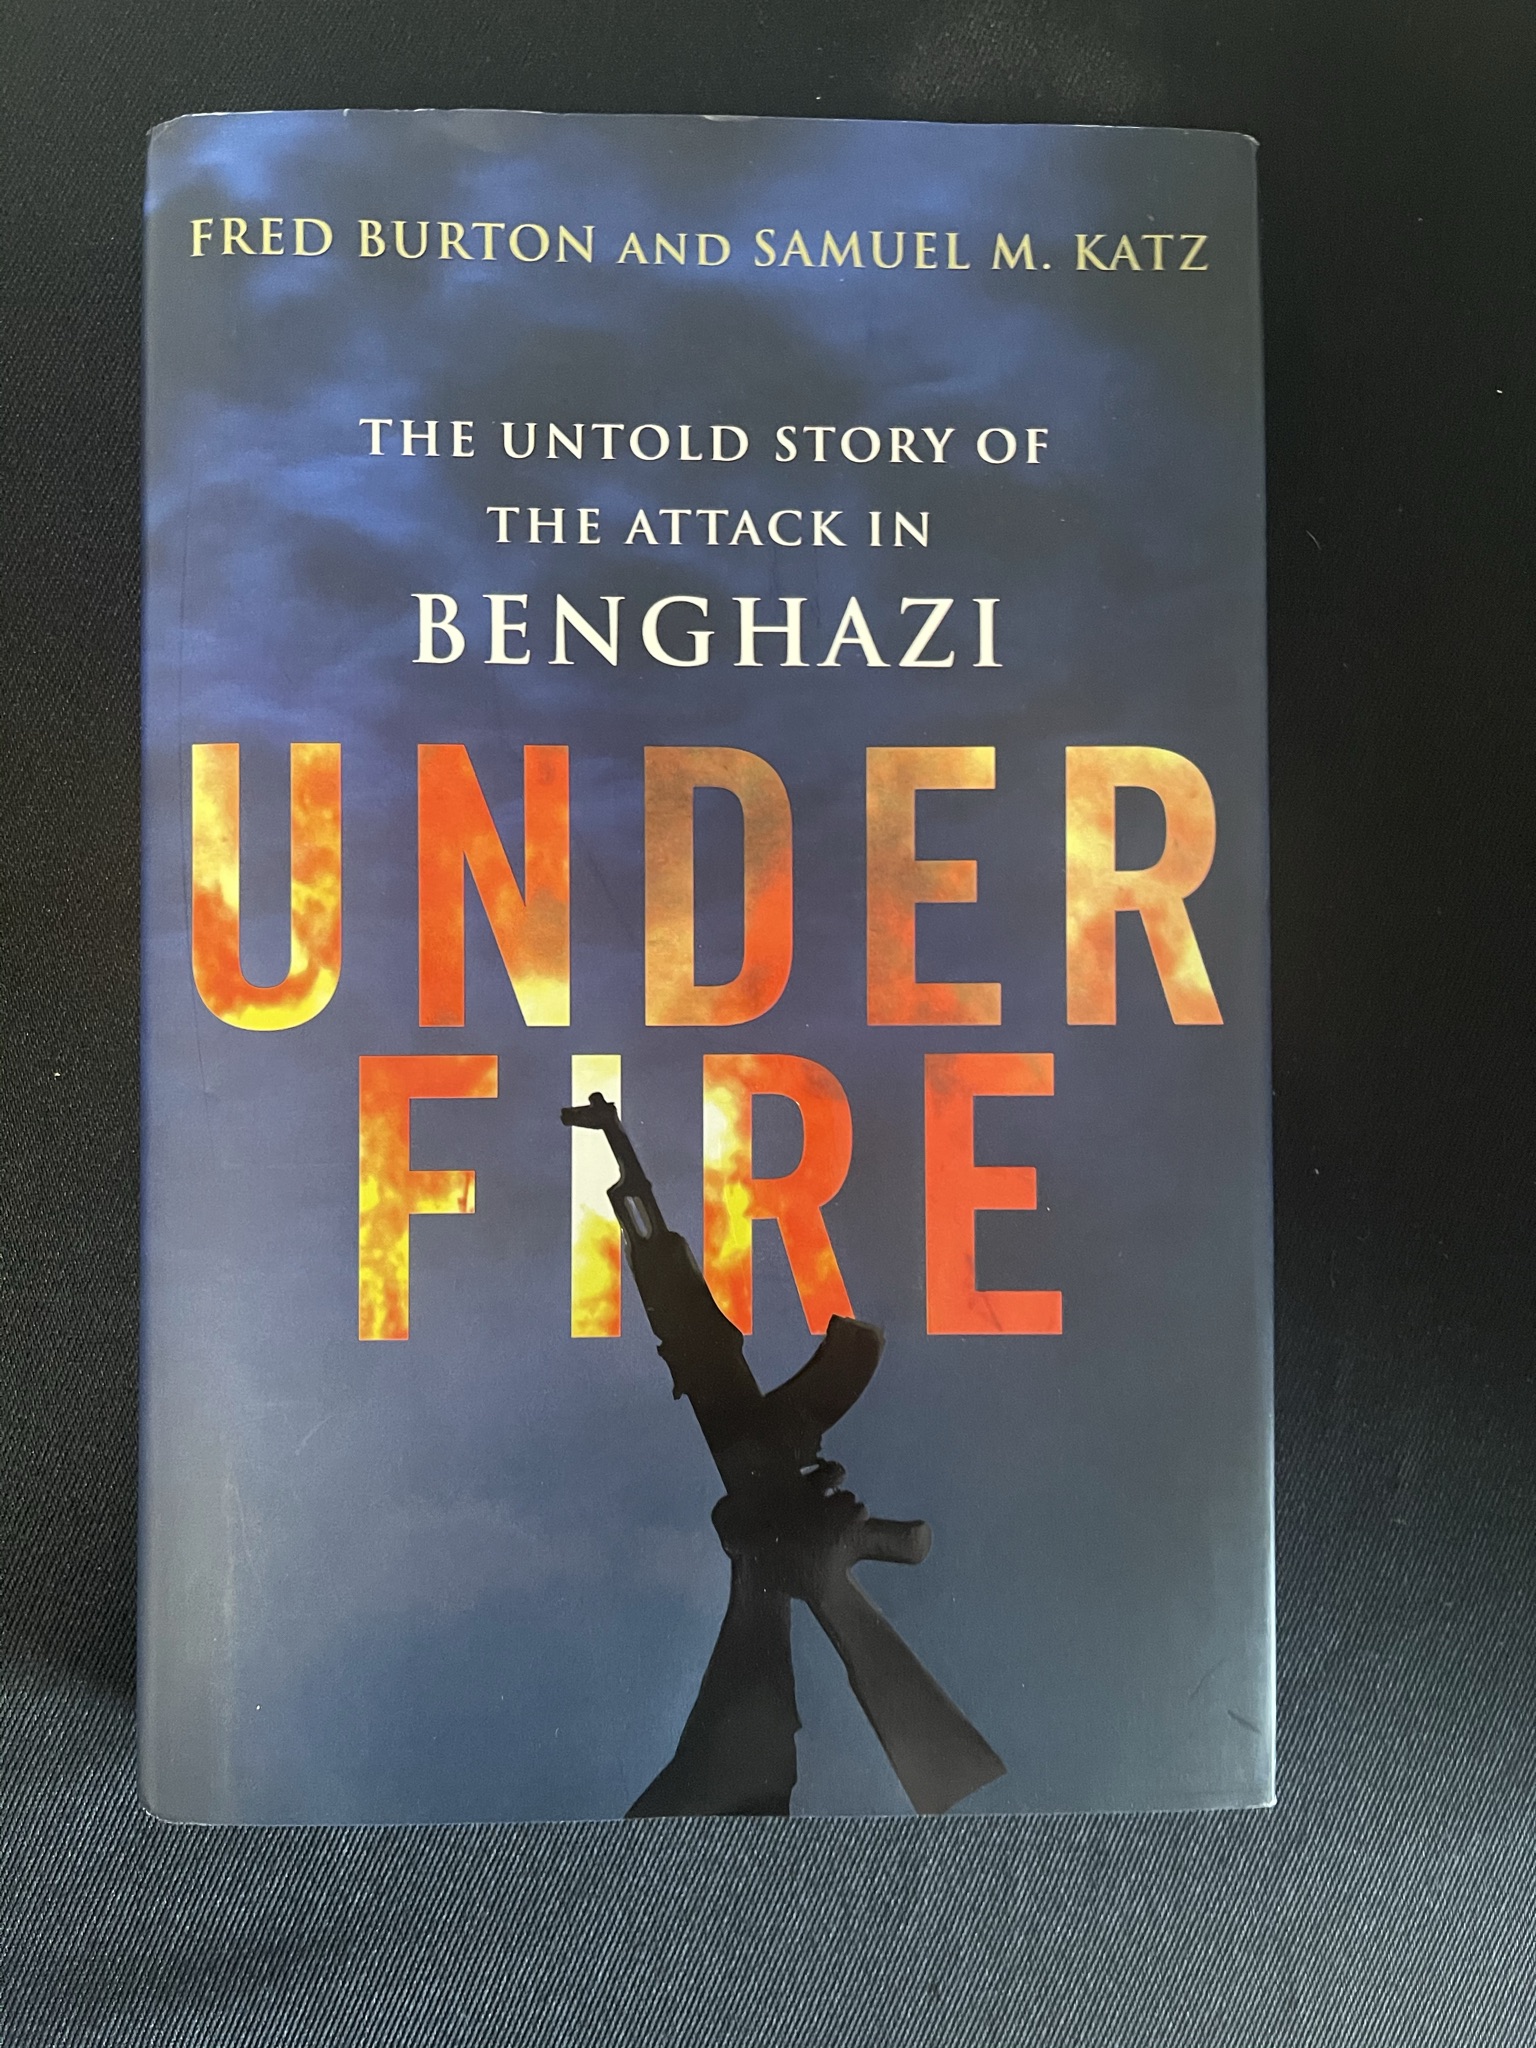 Featured image for “Under Fire”